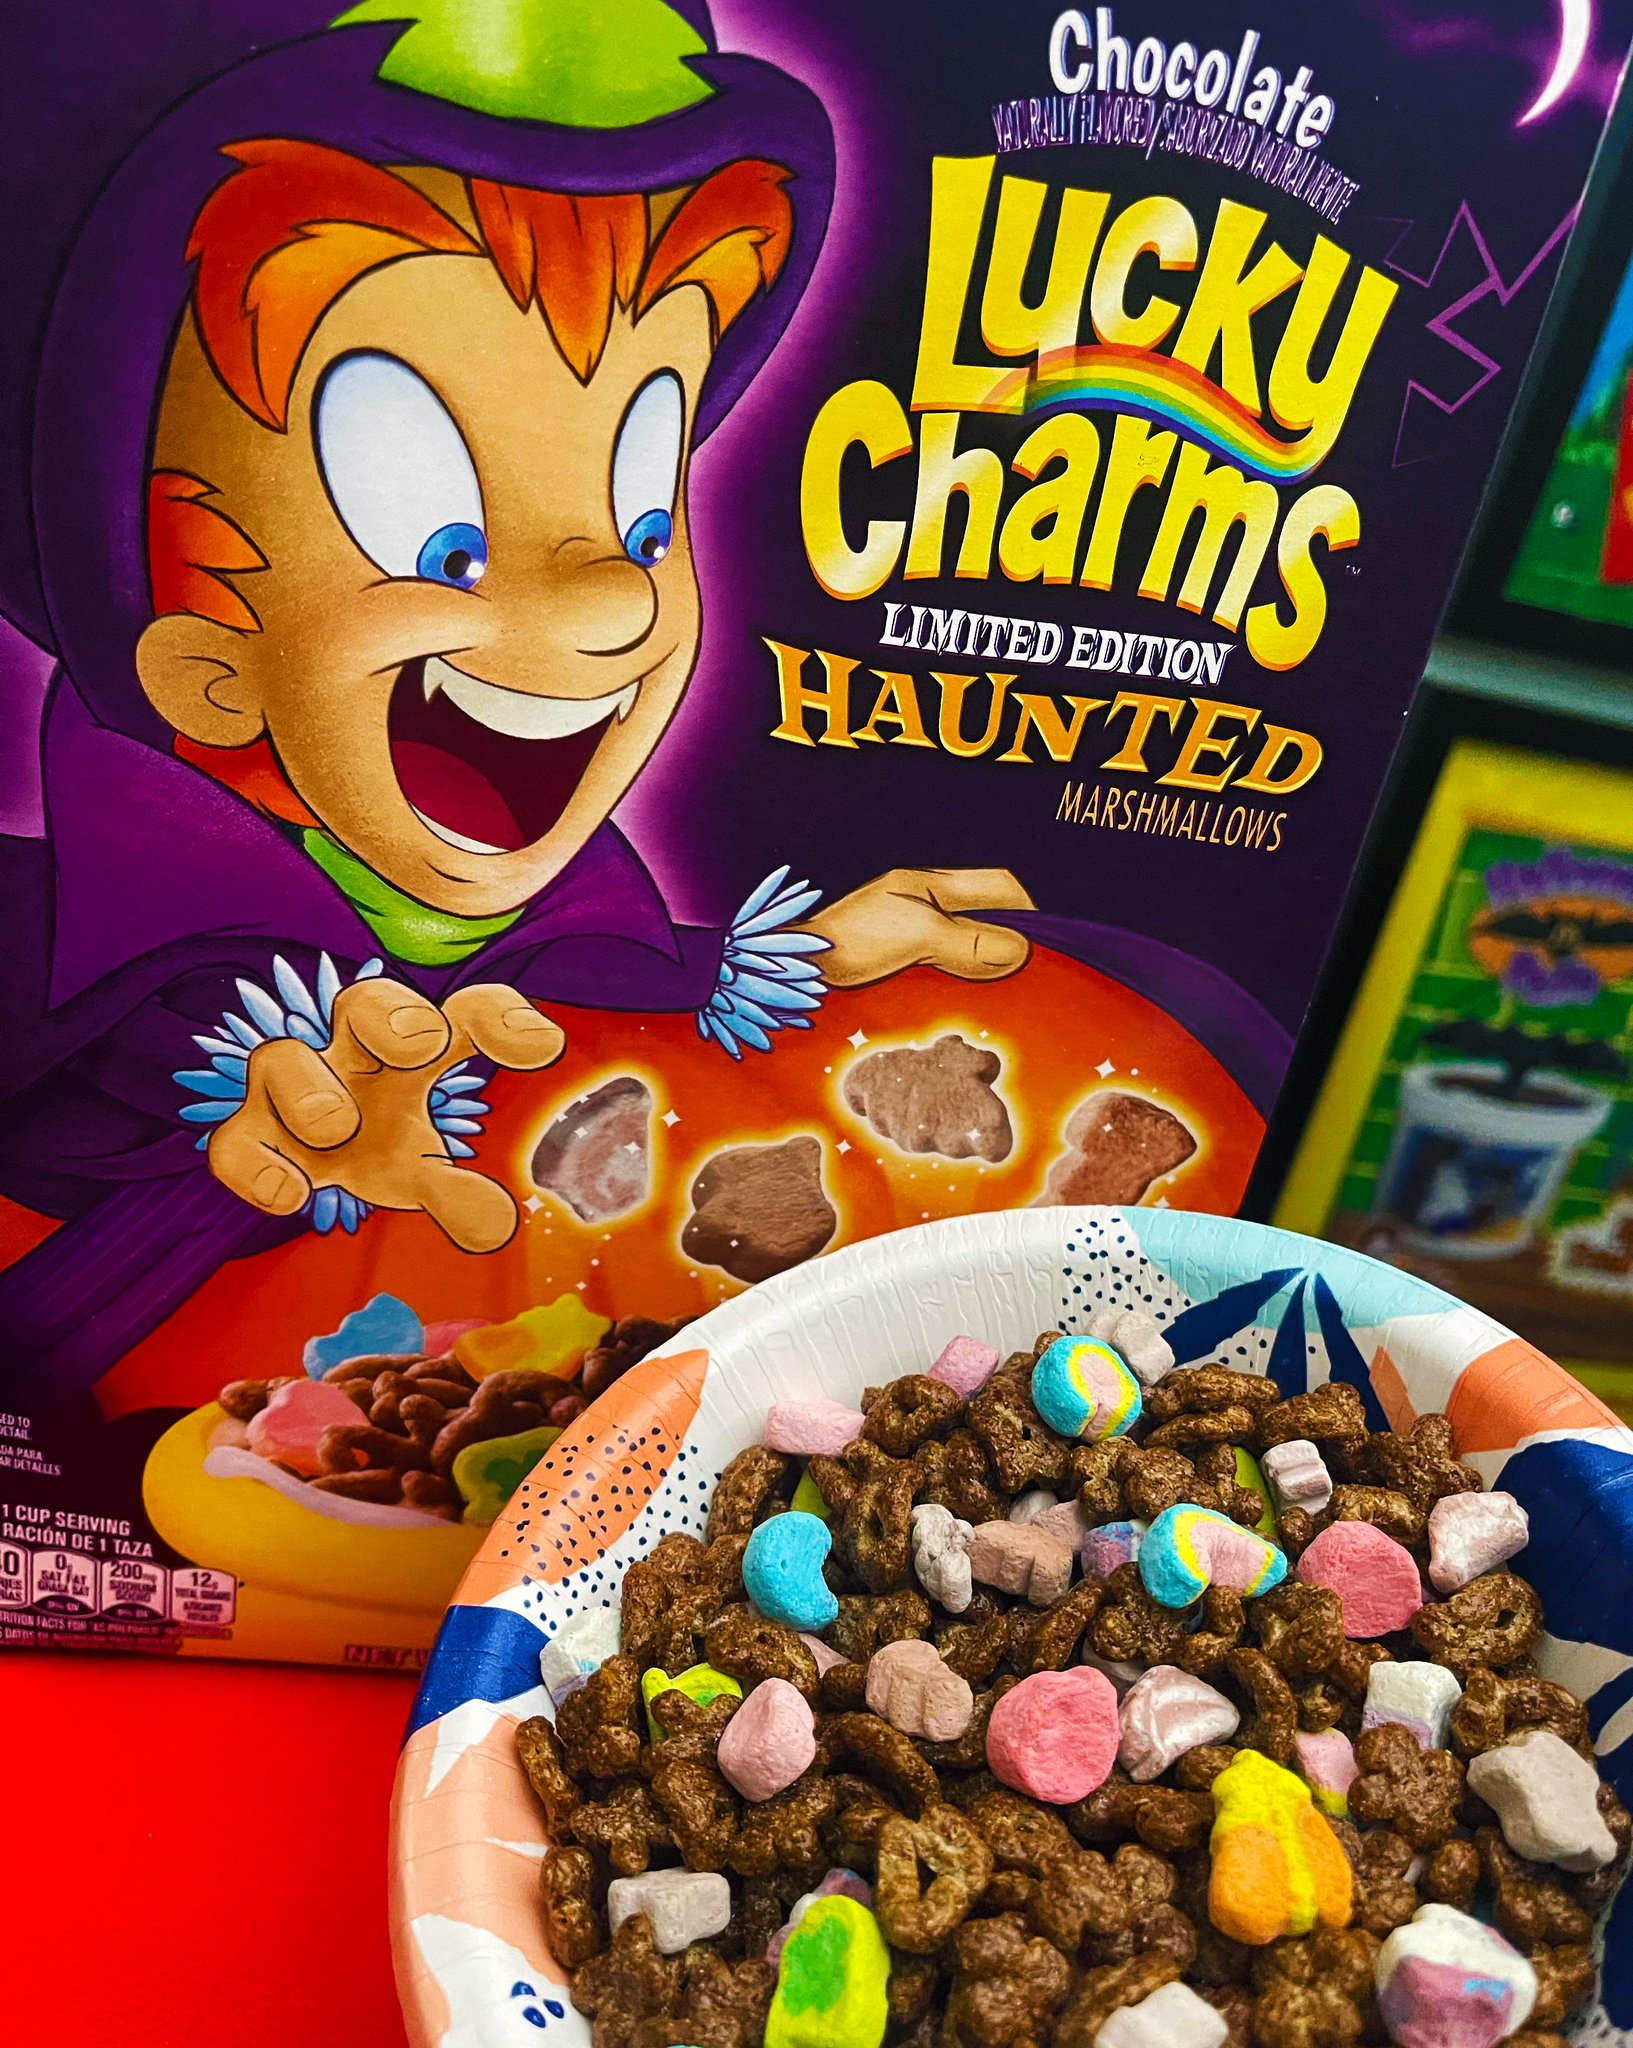 Chocolate Lucky Charms Cereal with Haunted Marshmallows, Halloween